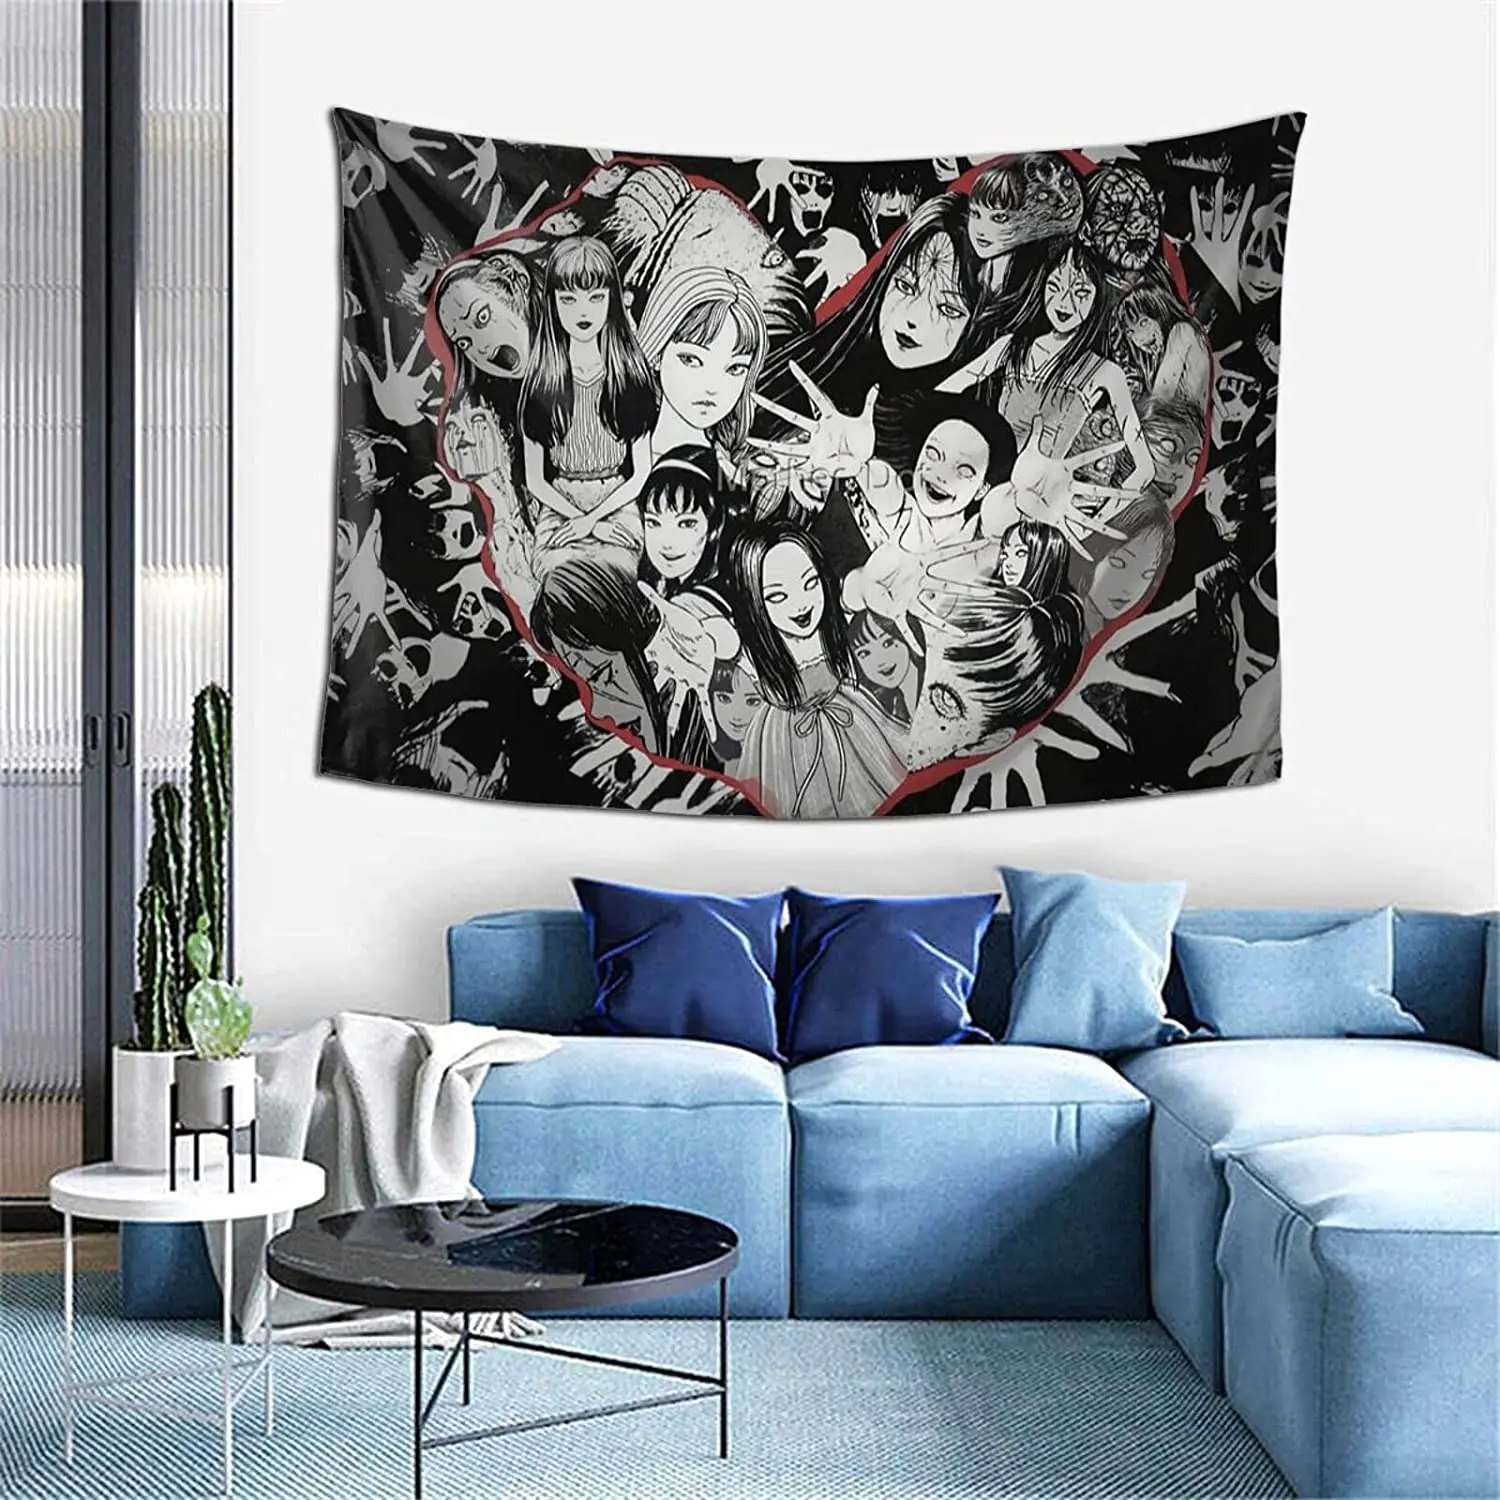 Junji Ito Uzumaki Tapestry Boutique Wall Tapestry Aesthetic Home Decoration Large Tapestry 80x60inch